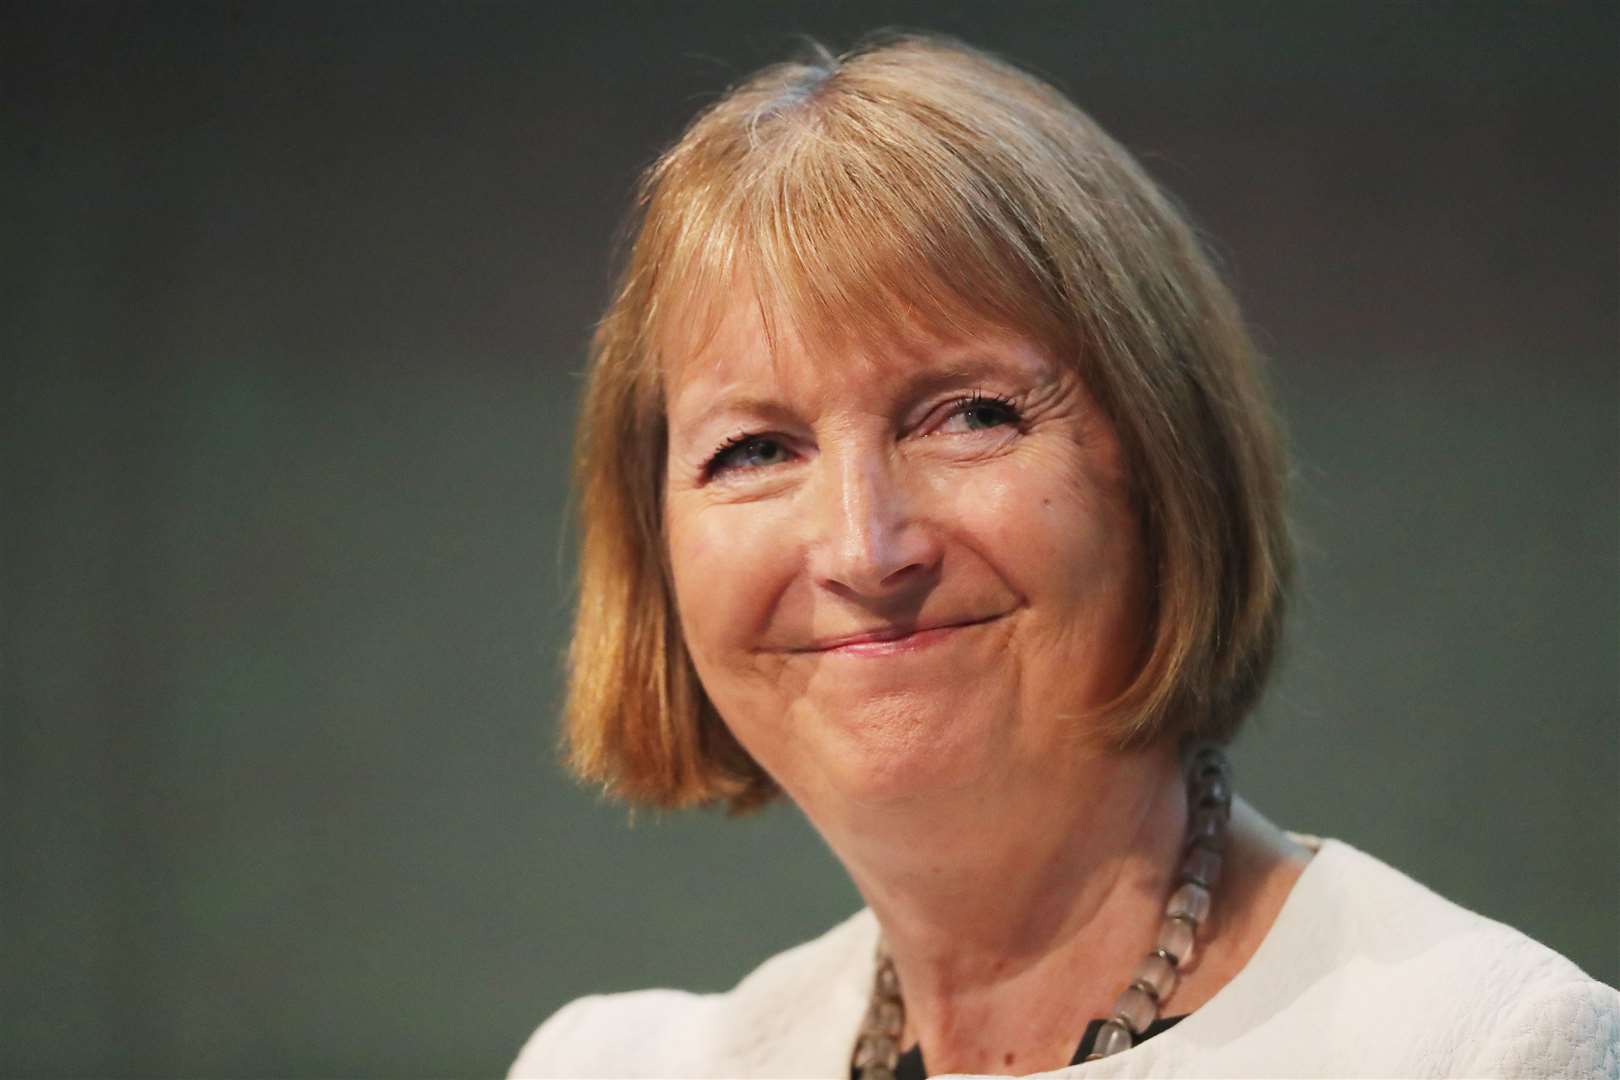 Harriet Harman is chairing the Privileges Committee investigation (Niall Carson/PA)